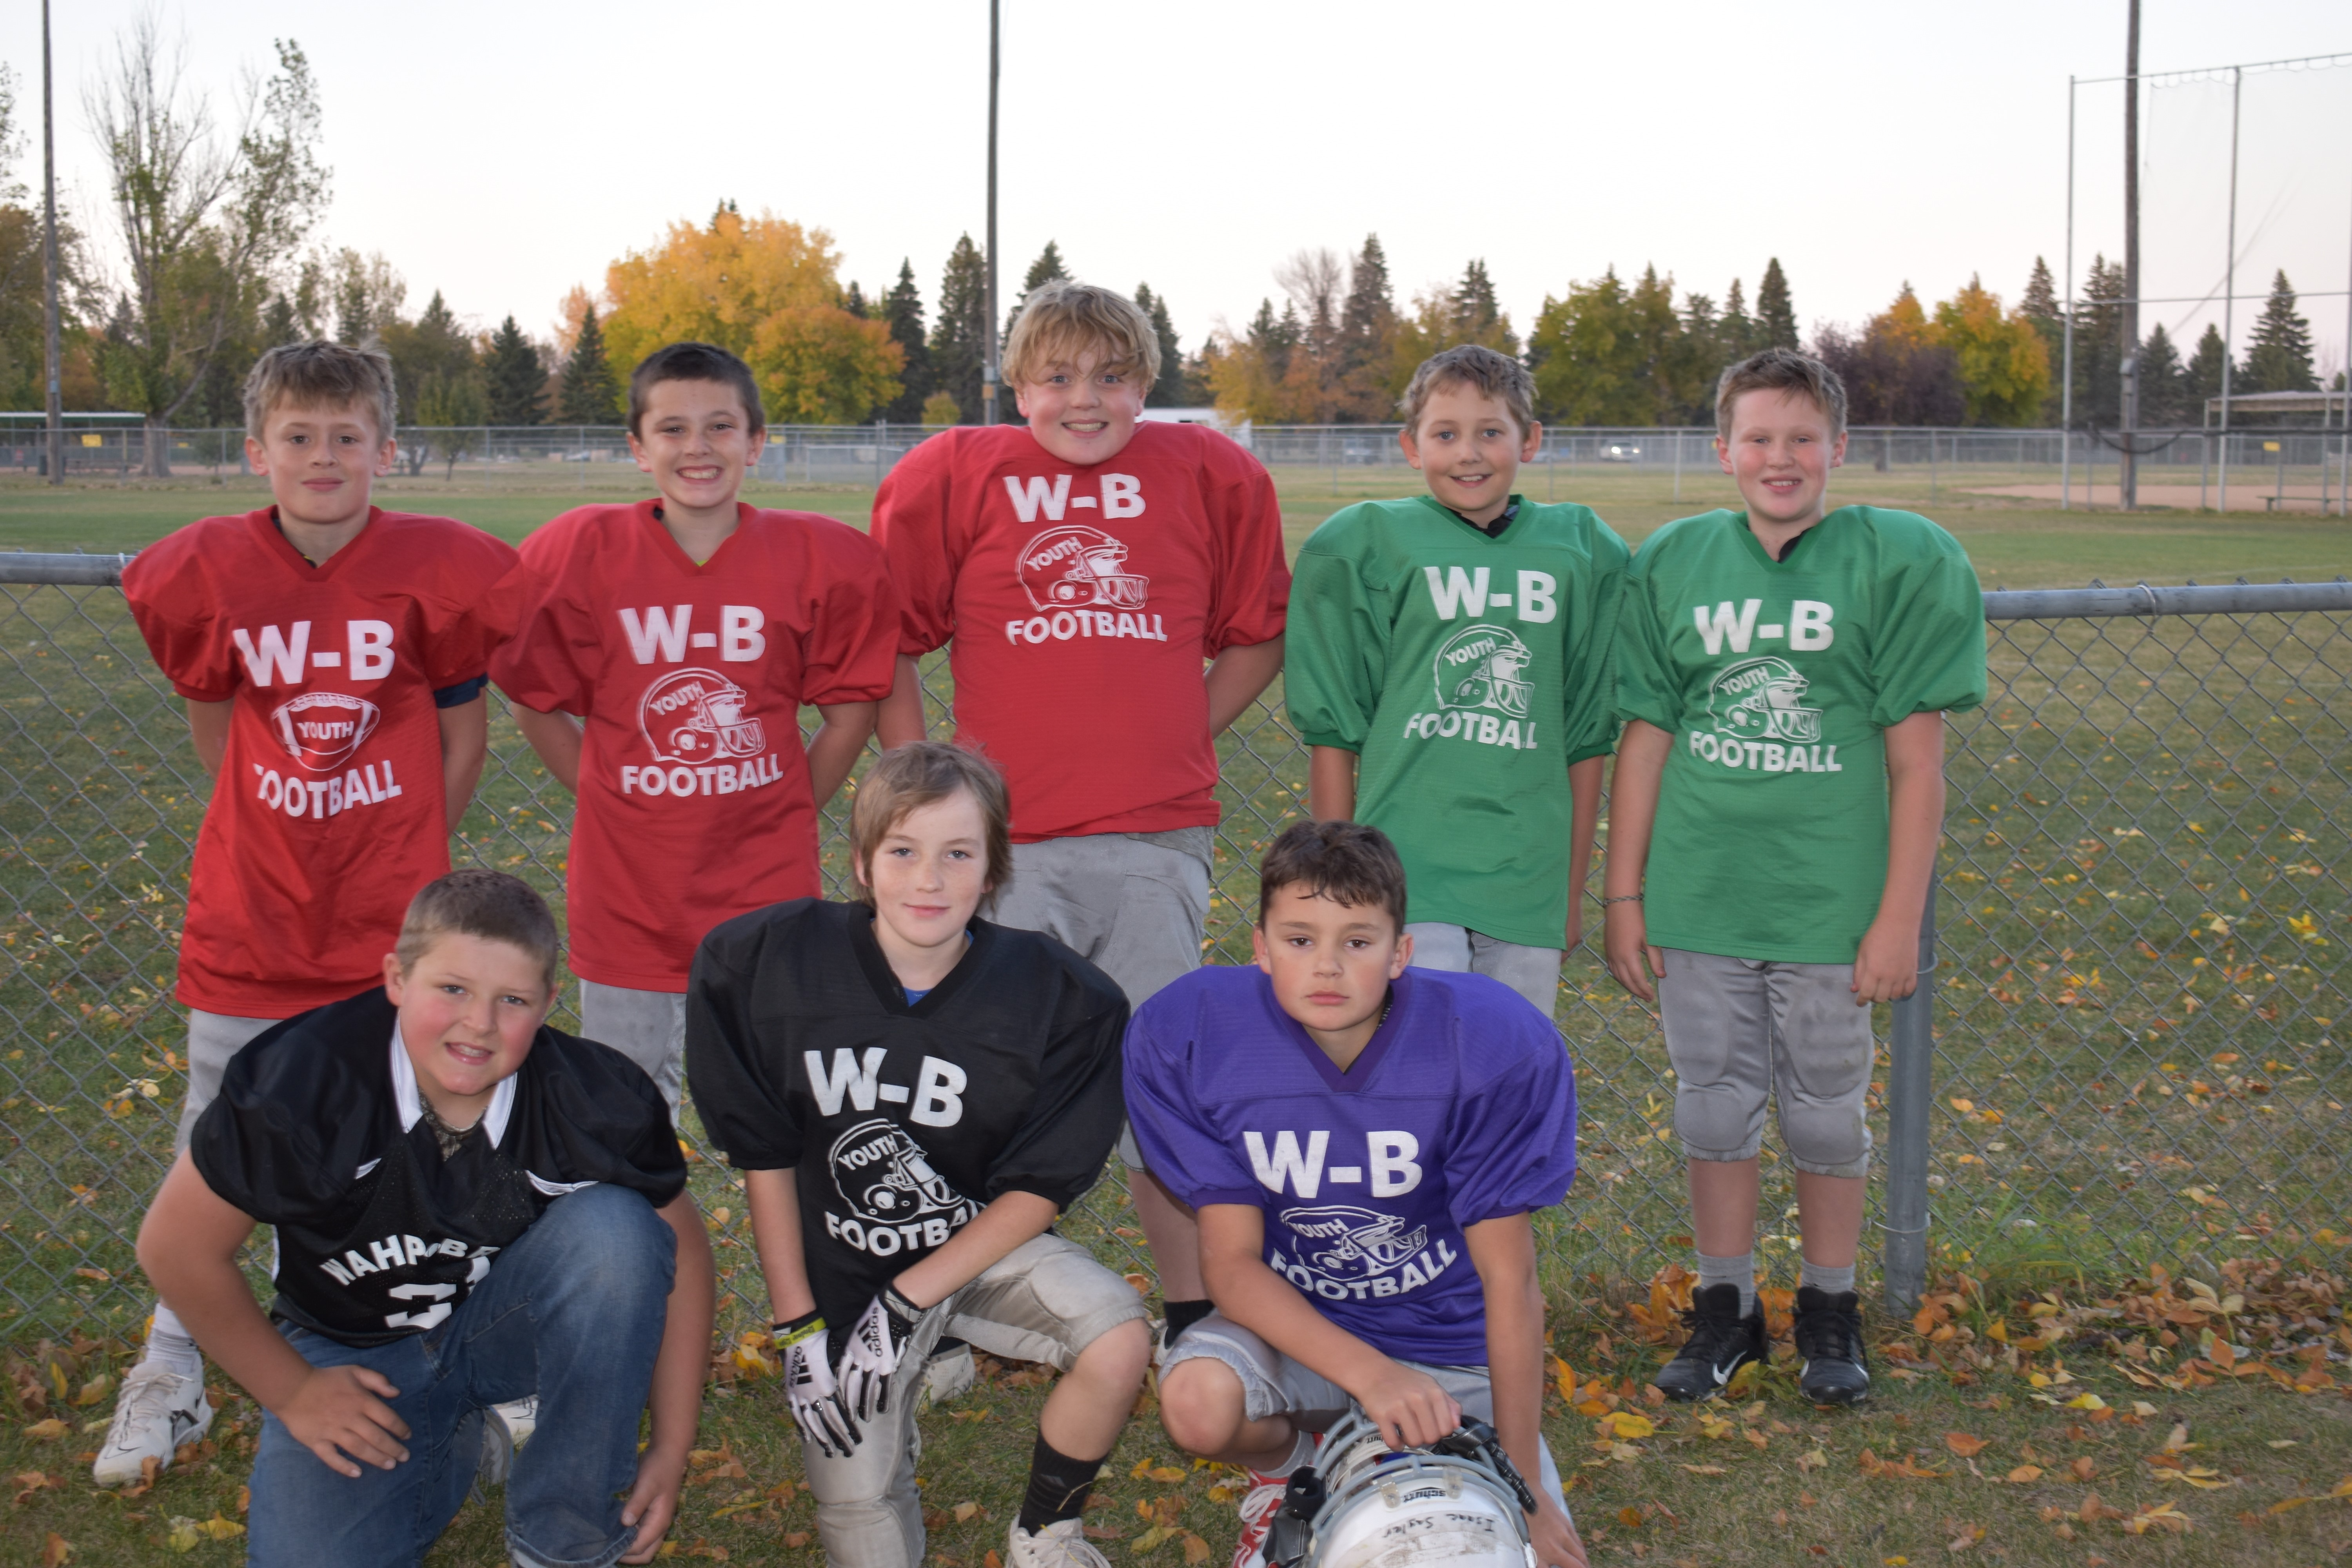 W-B Football players from Richland